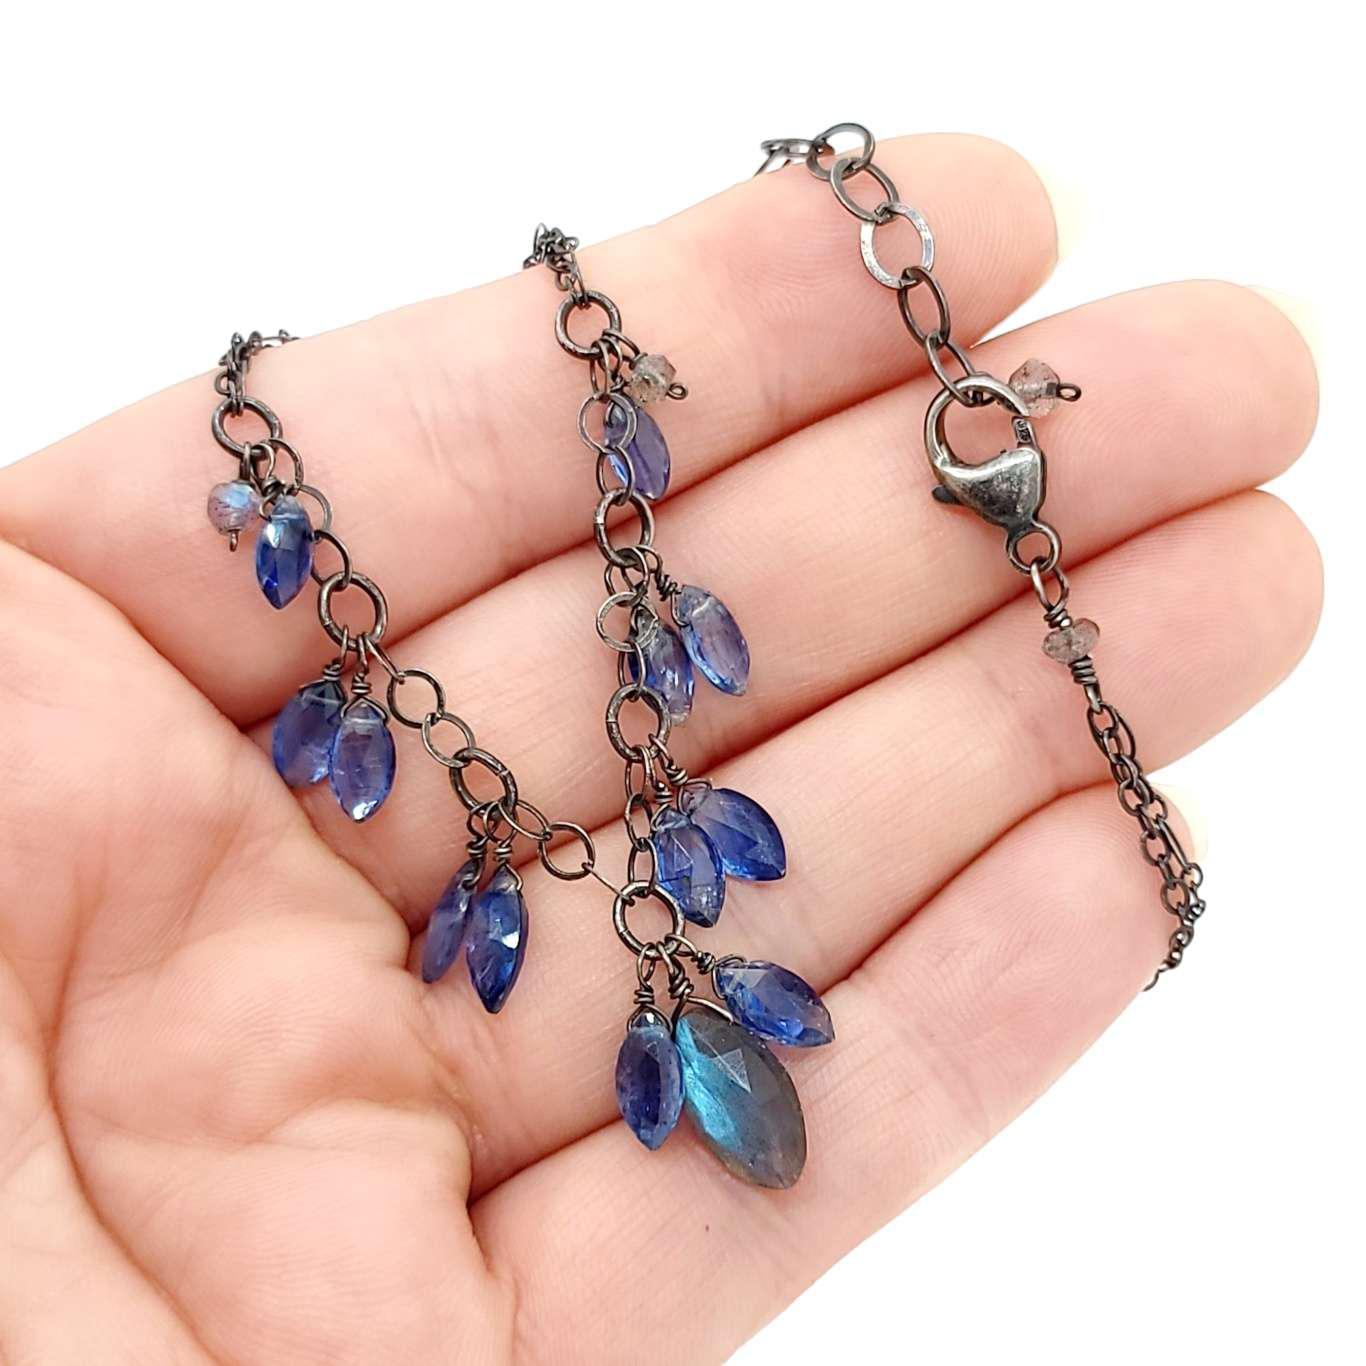 Necklace - Kyanite and Labradorite Clusters by Calliope Jewelry